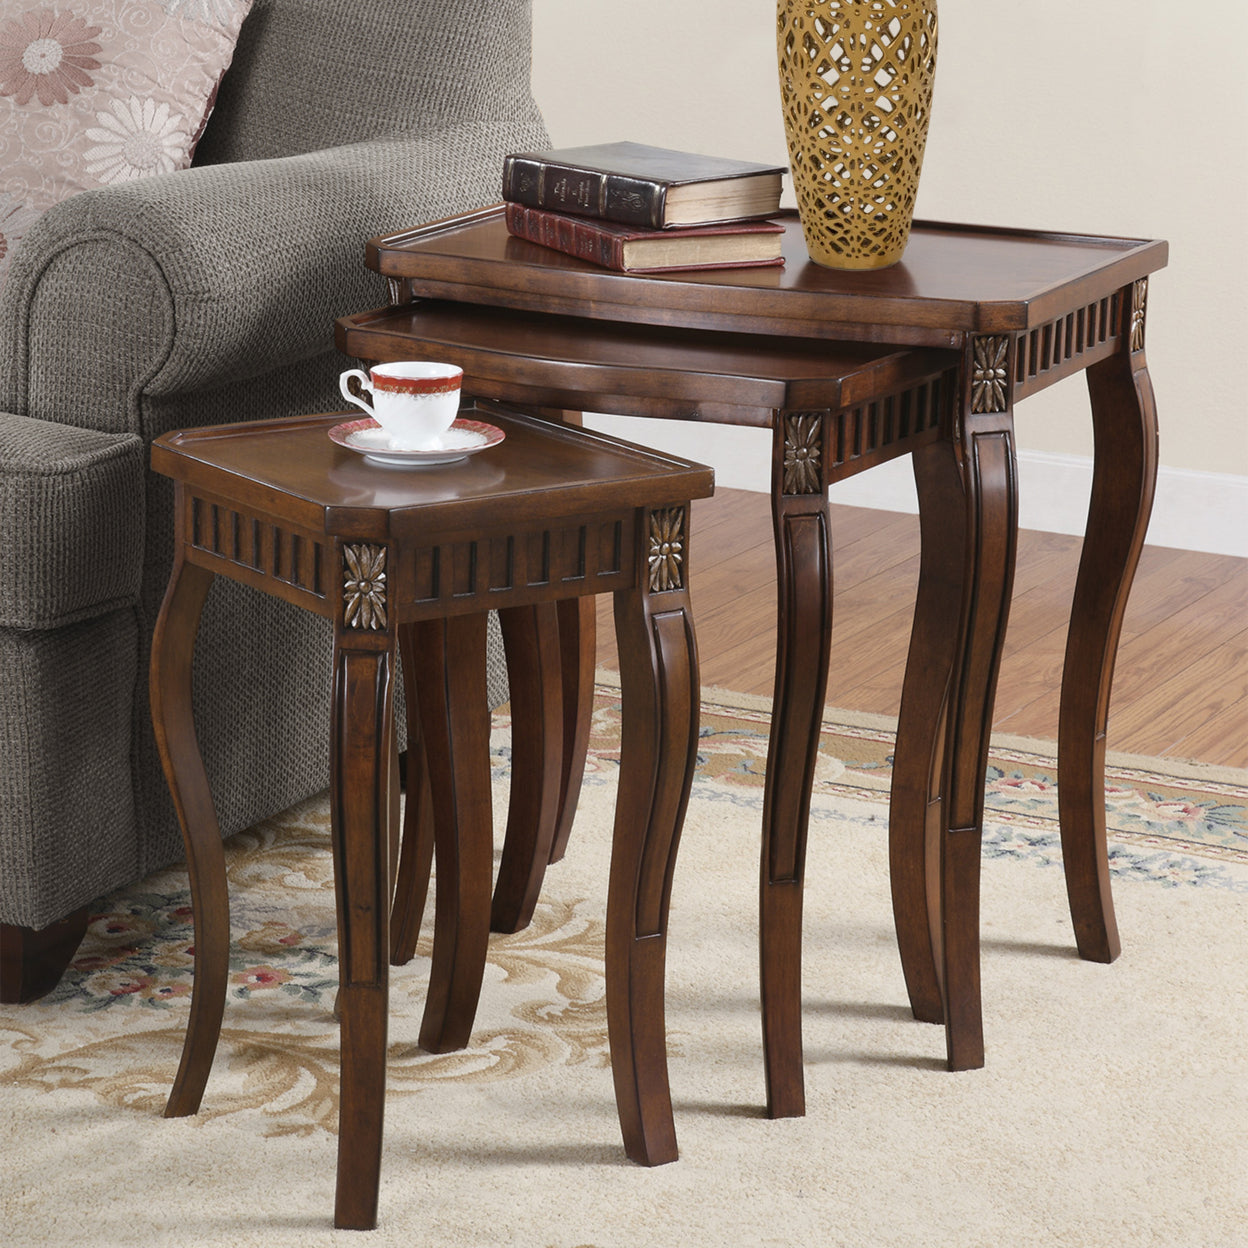 3-piece Curved Leg Nesting Tables Warm Brown